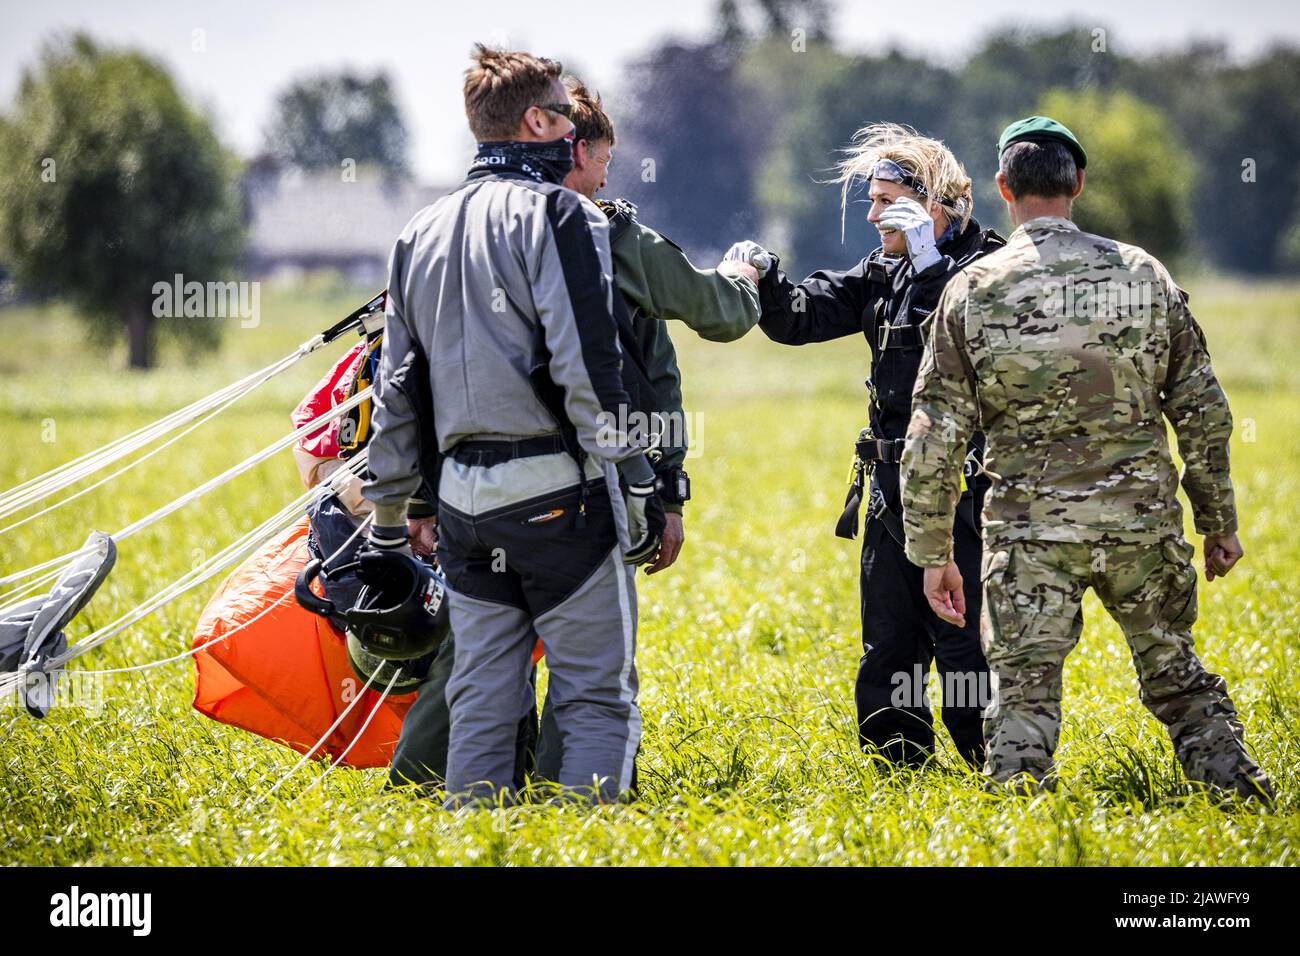 2022-06-01 14:27:00 BREDA - Queen Maxima makes a parachute jump in an airplane during her working visit to the Defense Para School. Since 2008, the Defense Para School provides all parachute training within the armed forces. ANP ROB ENGELAAR netherlands out - belgium out Stock Photo